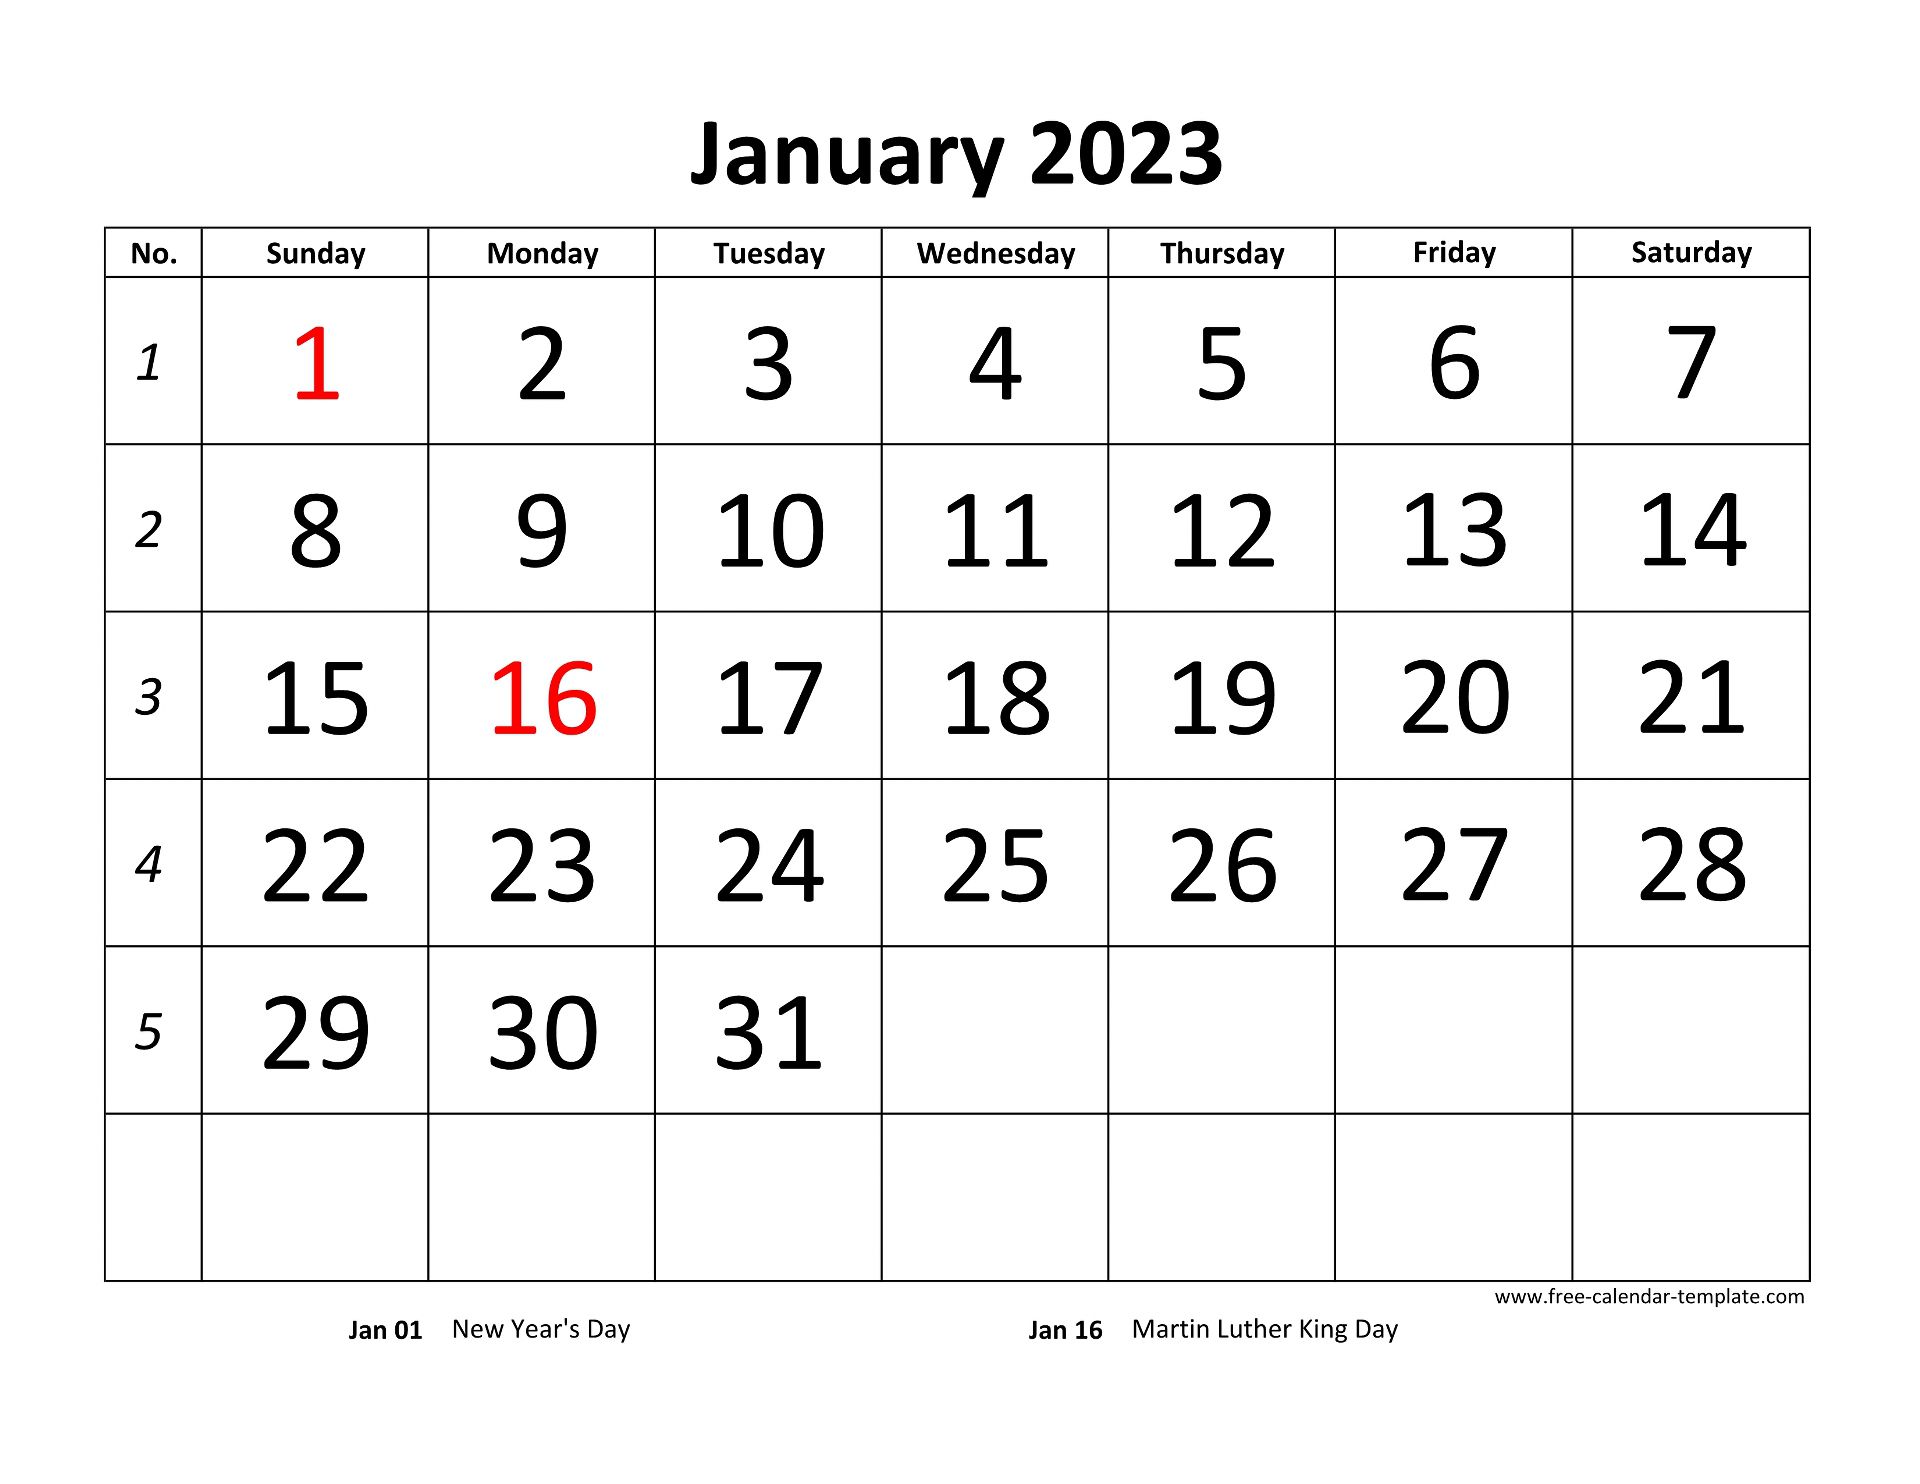 Weekly Calendars 2023 for PDF - 12 free printable templates